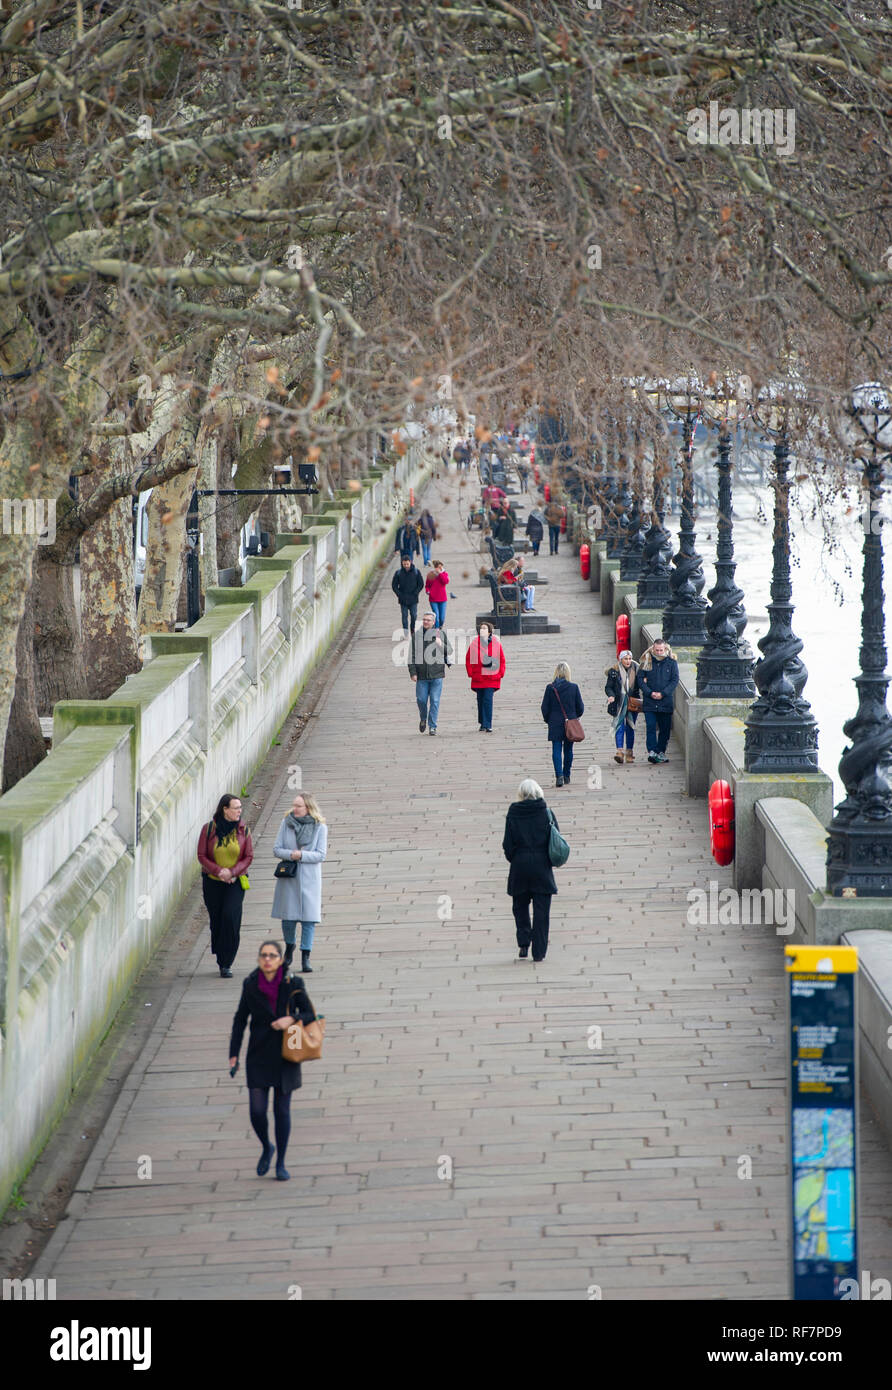 People walking along the South Bank by the River Thames in London UK  Photograph taken by Simon Dack Stock Photo